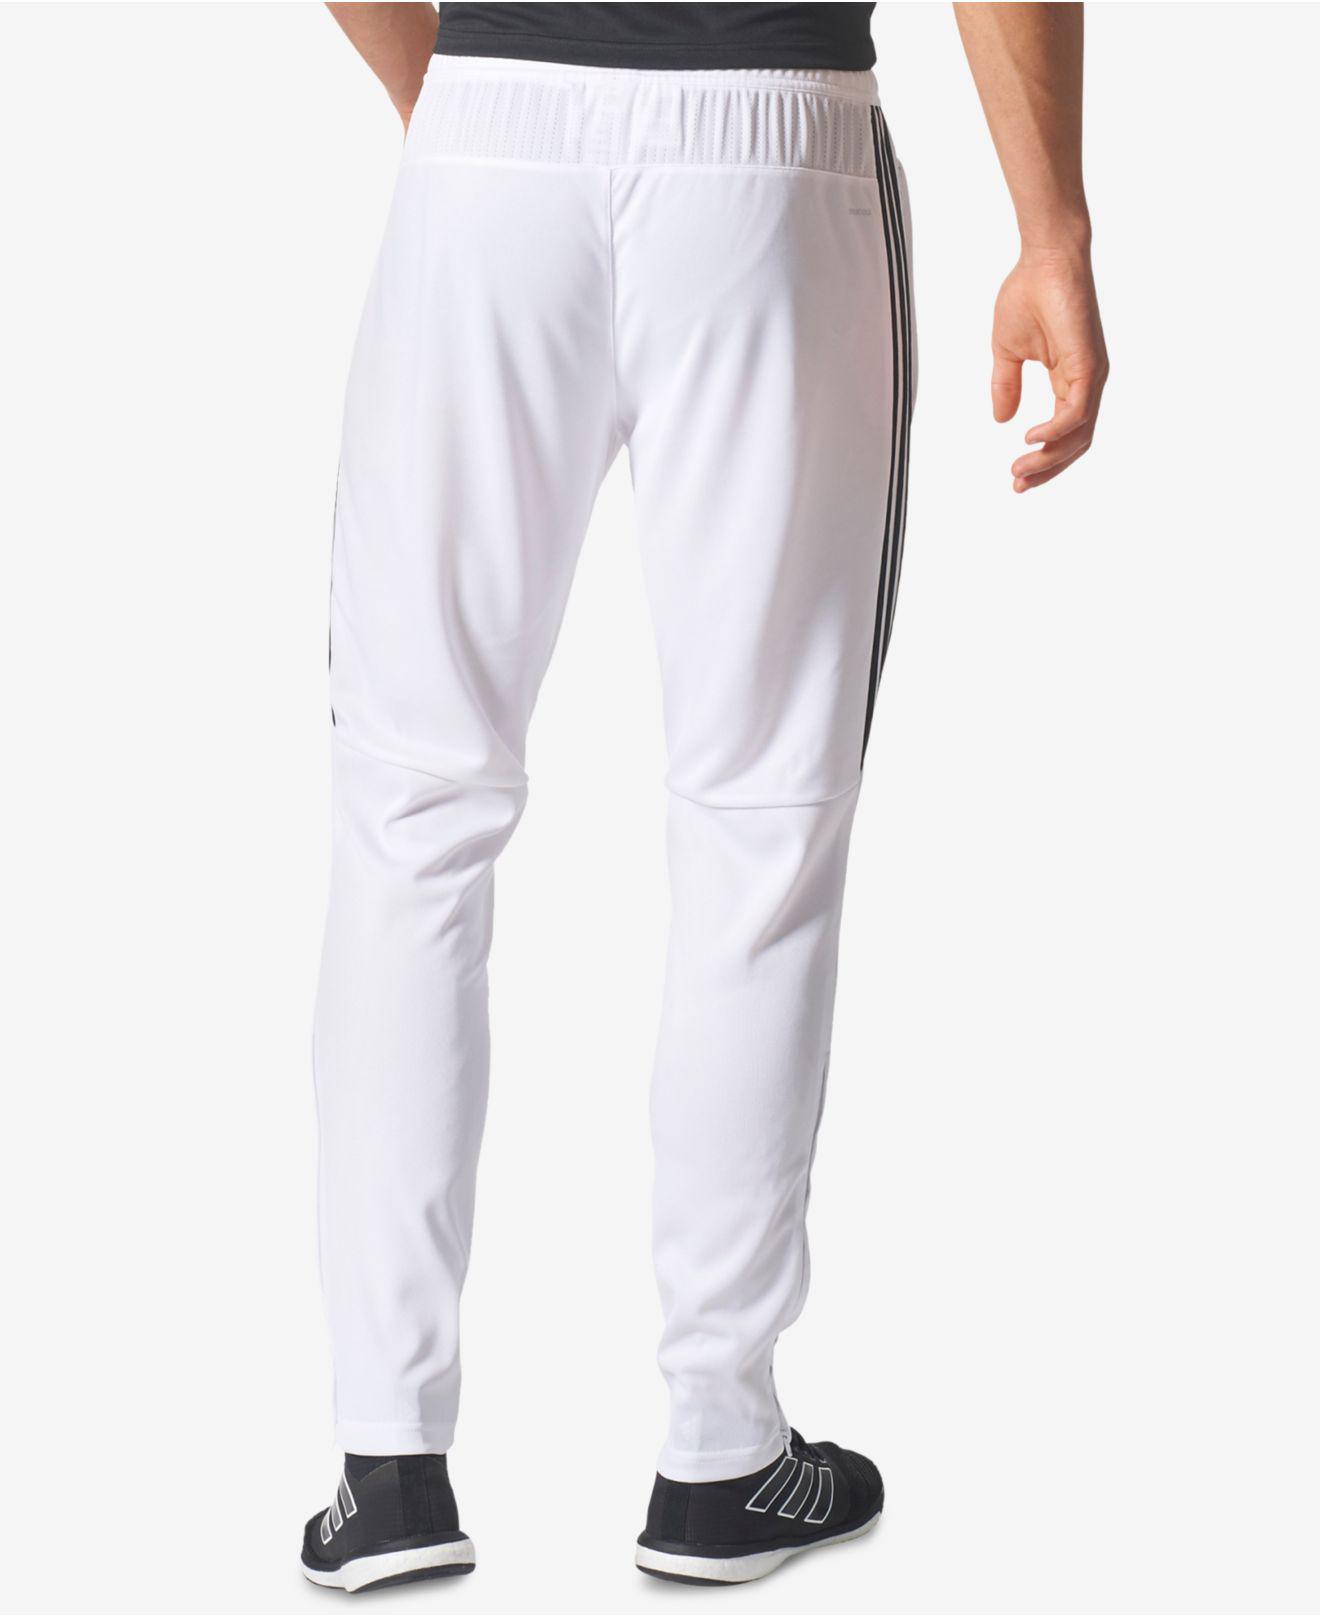 adidas climacool black and white pants